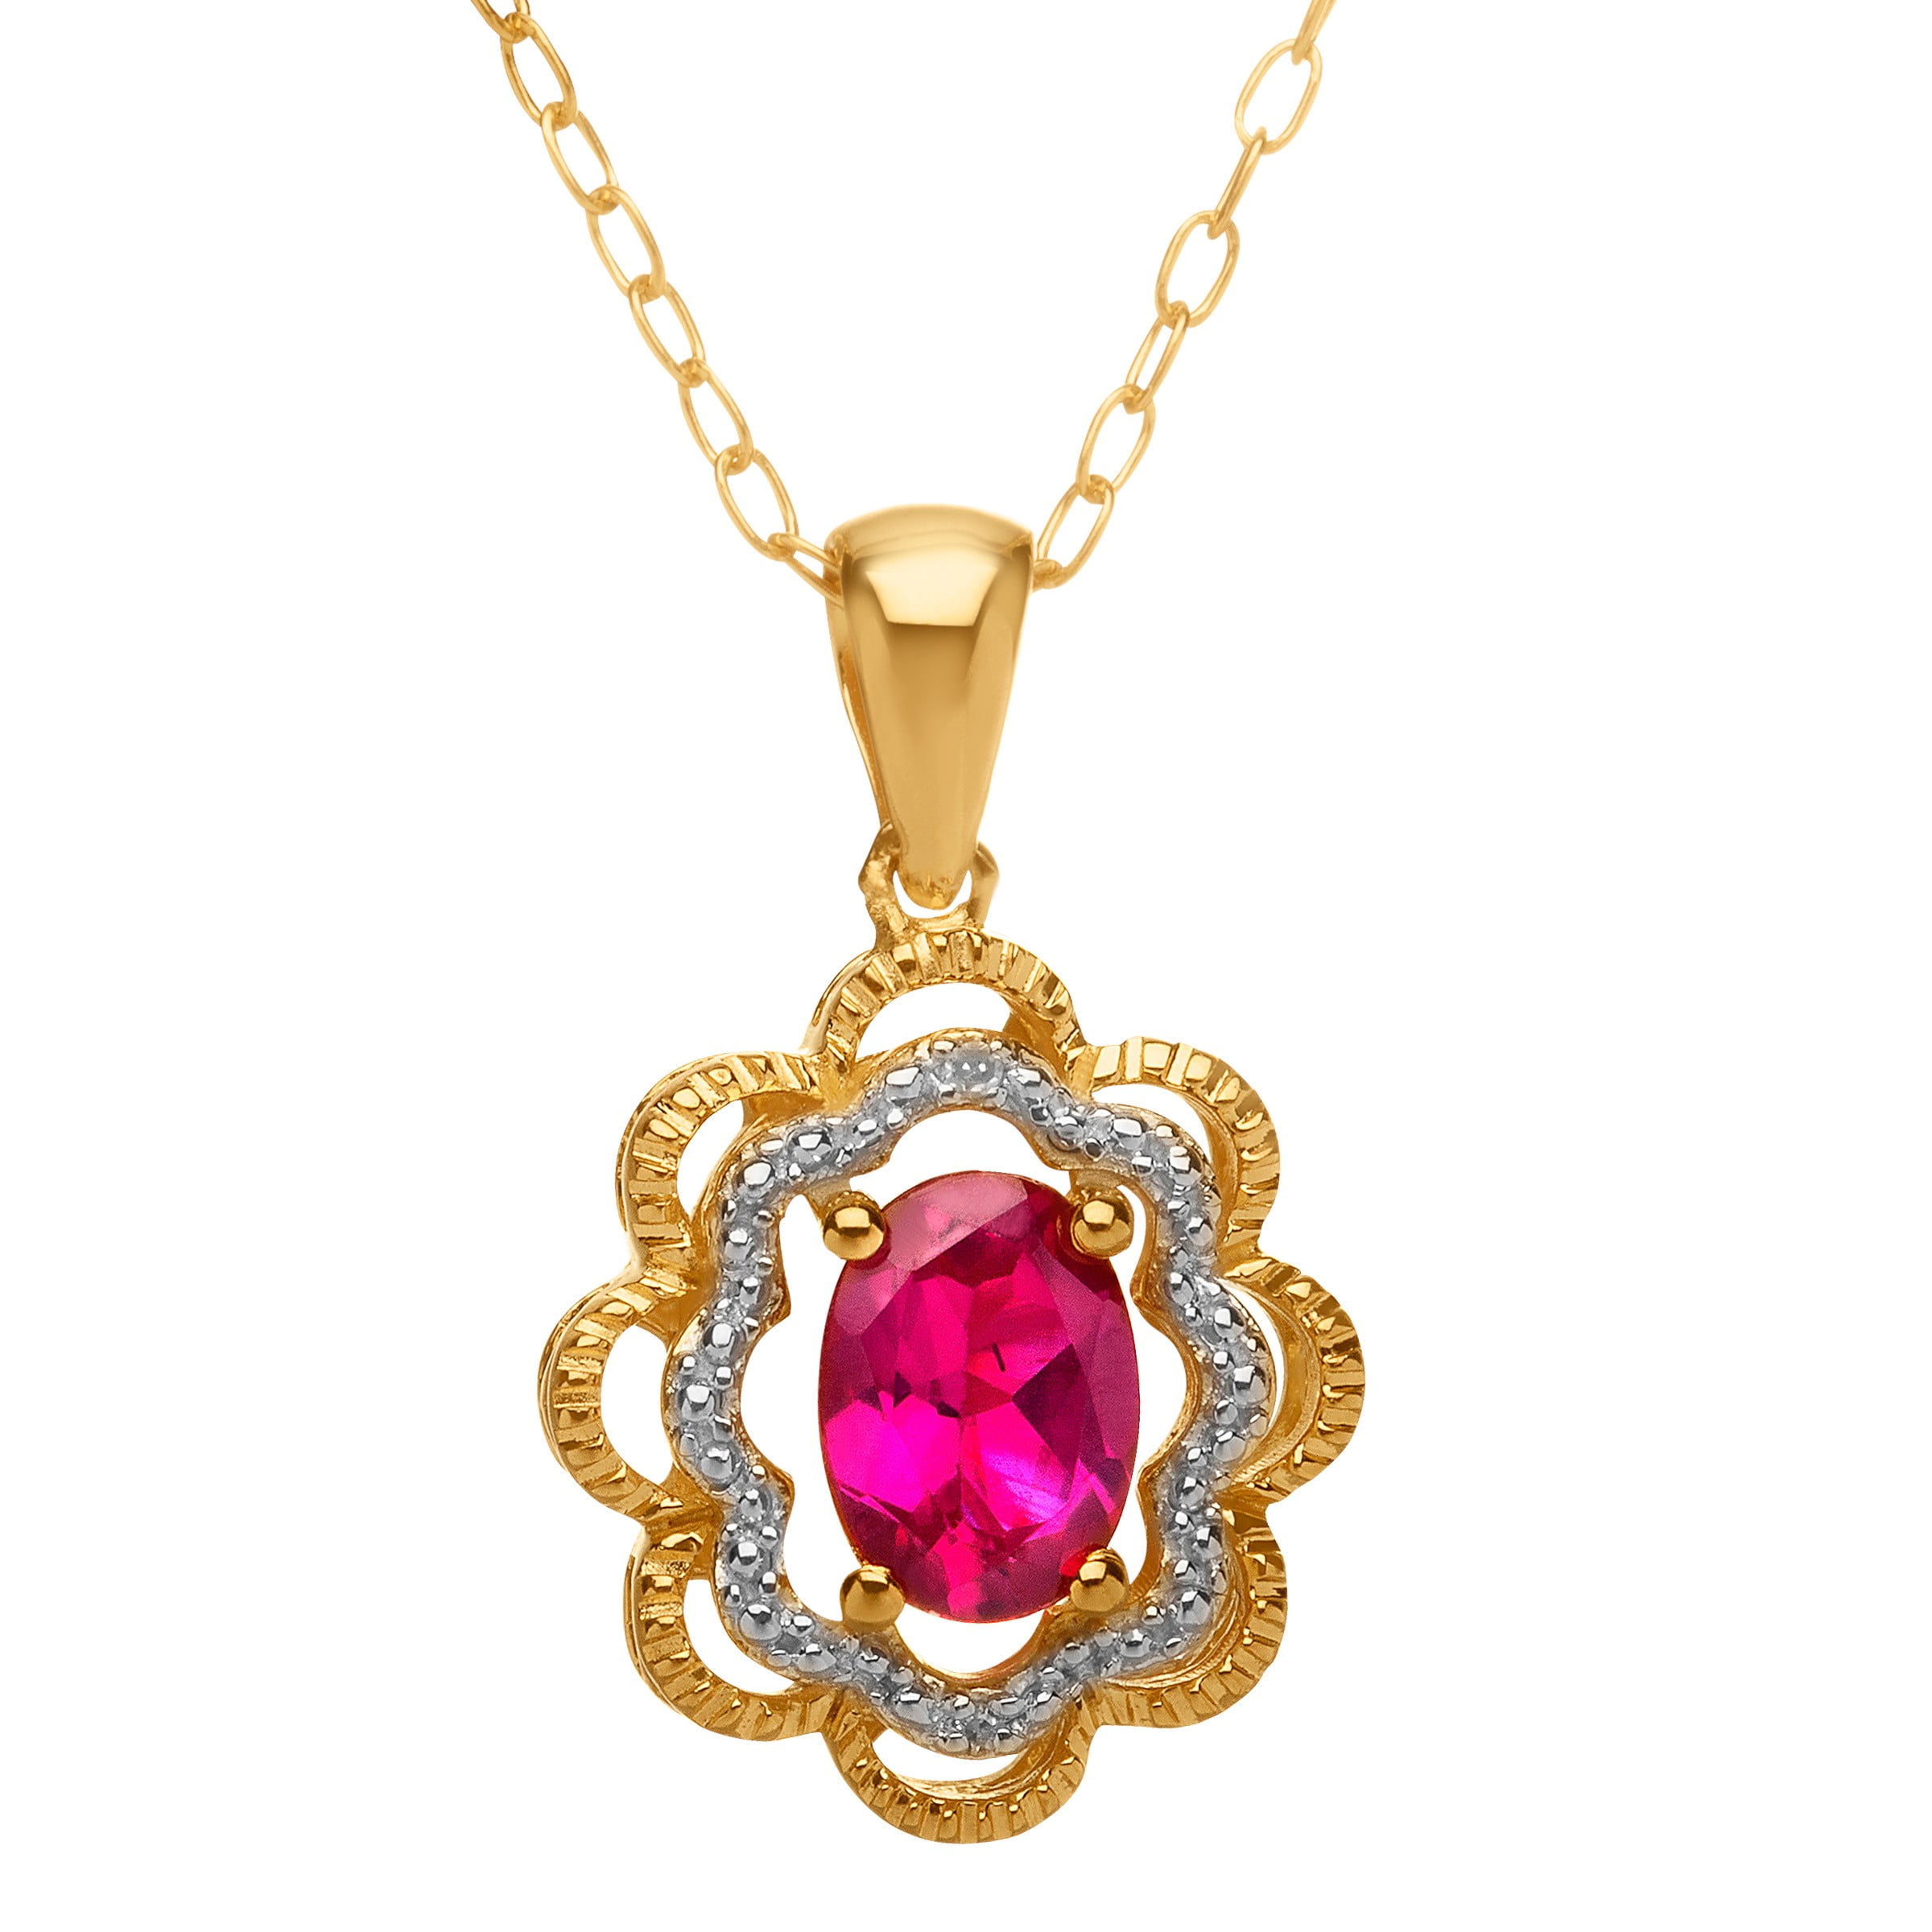 1 ct Ruby Pendant Necklace with Diamonds in 14kt Gold-Plated Sterling ...